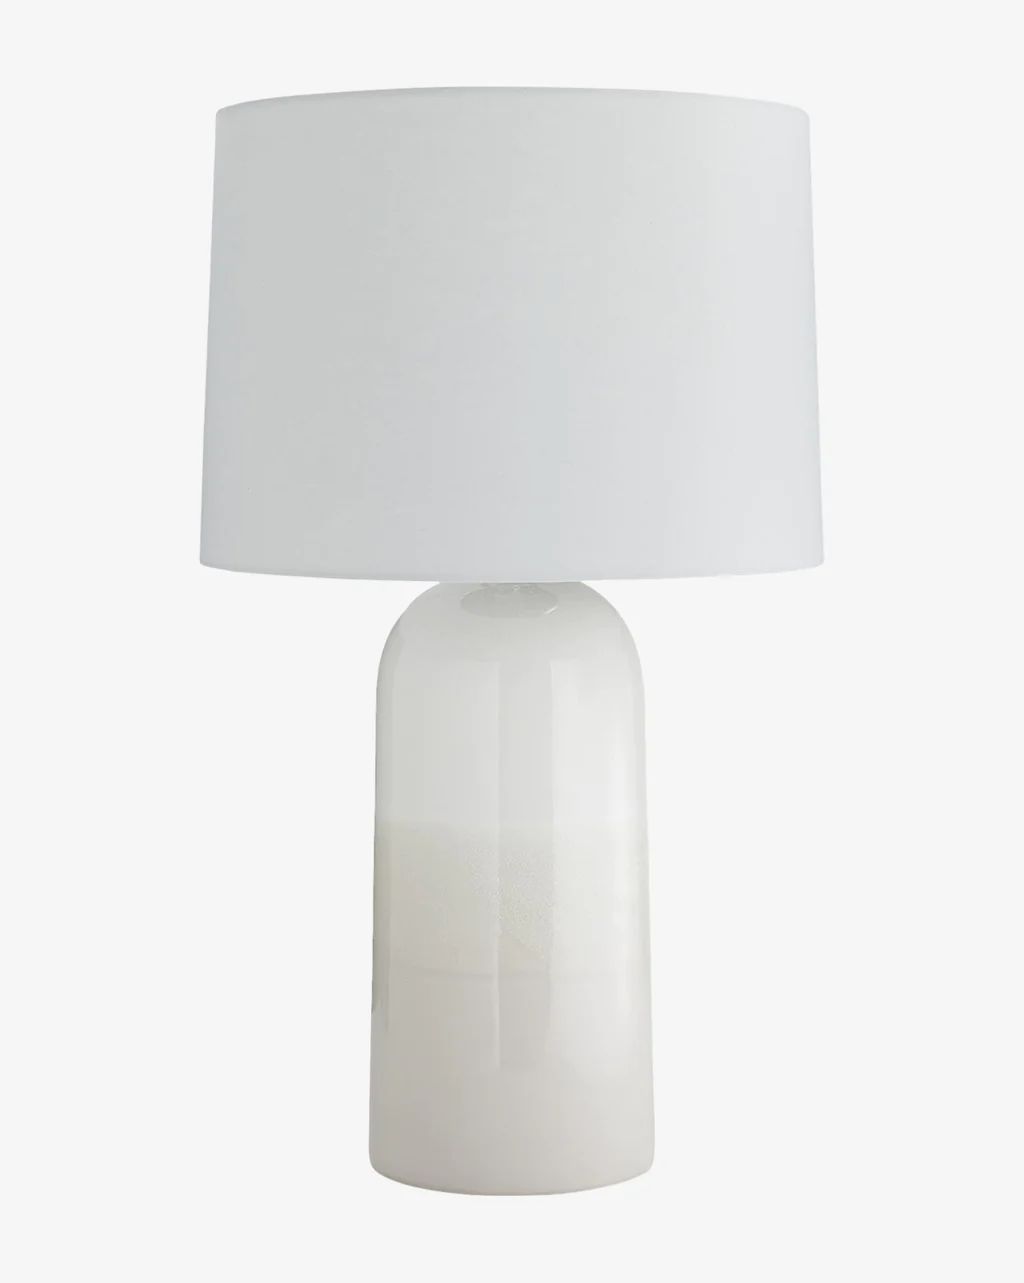 Serena Table Lamp | McGee & Co.